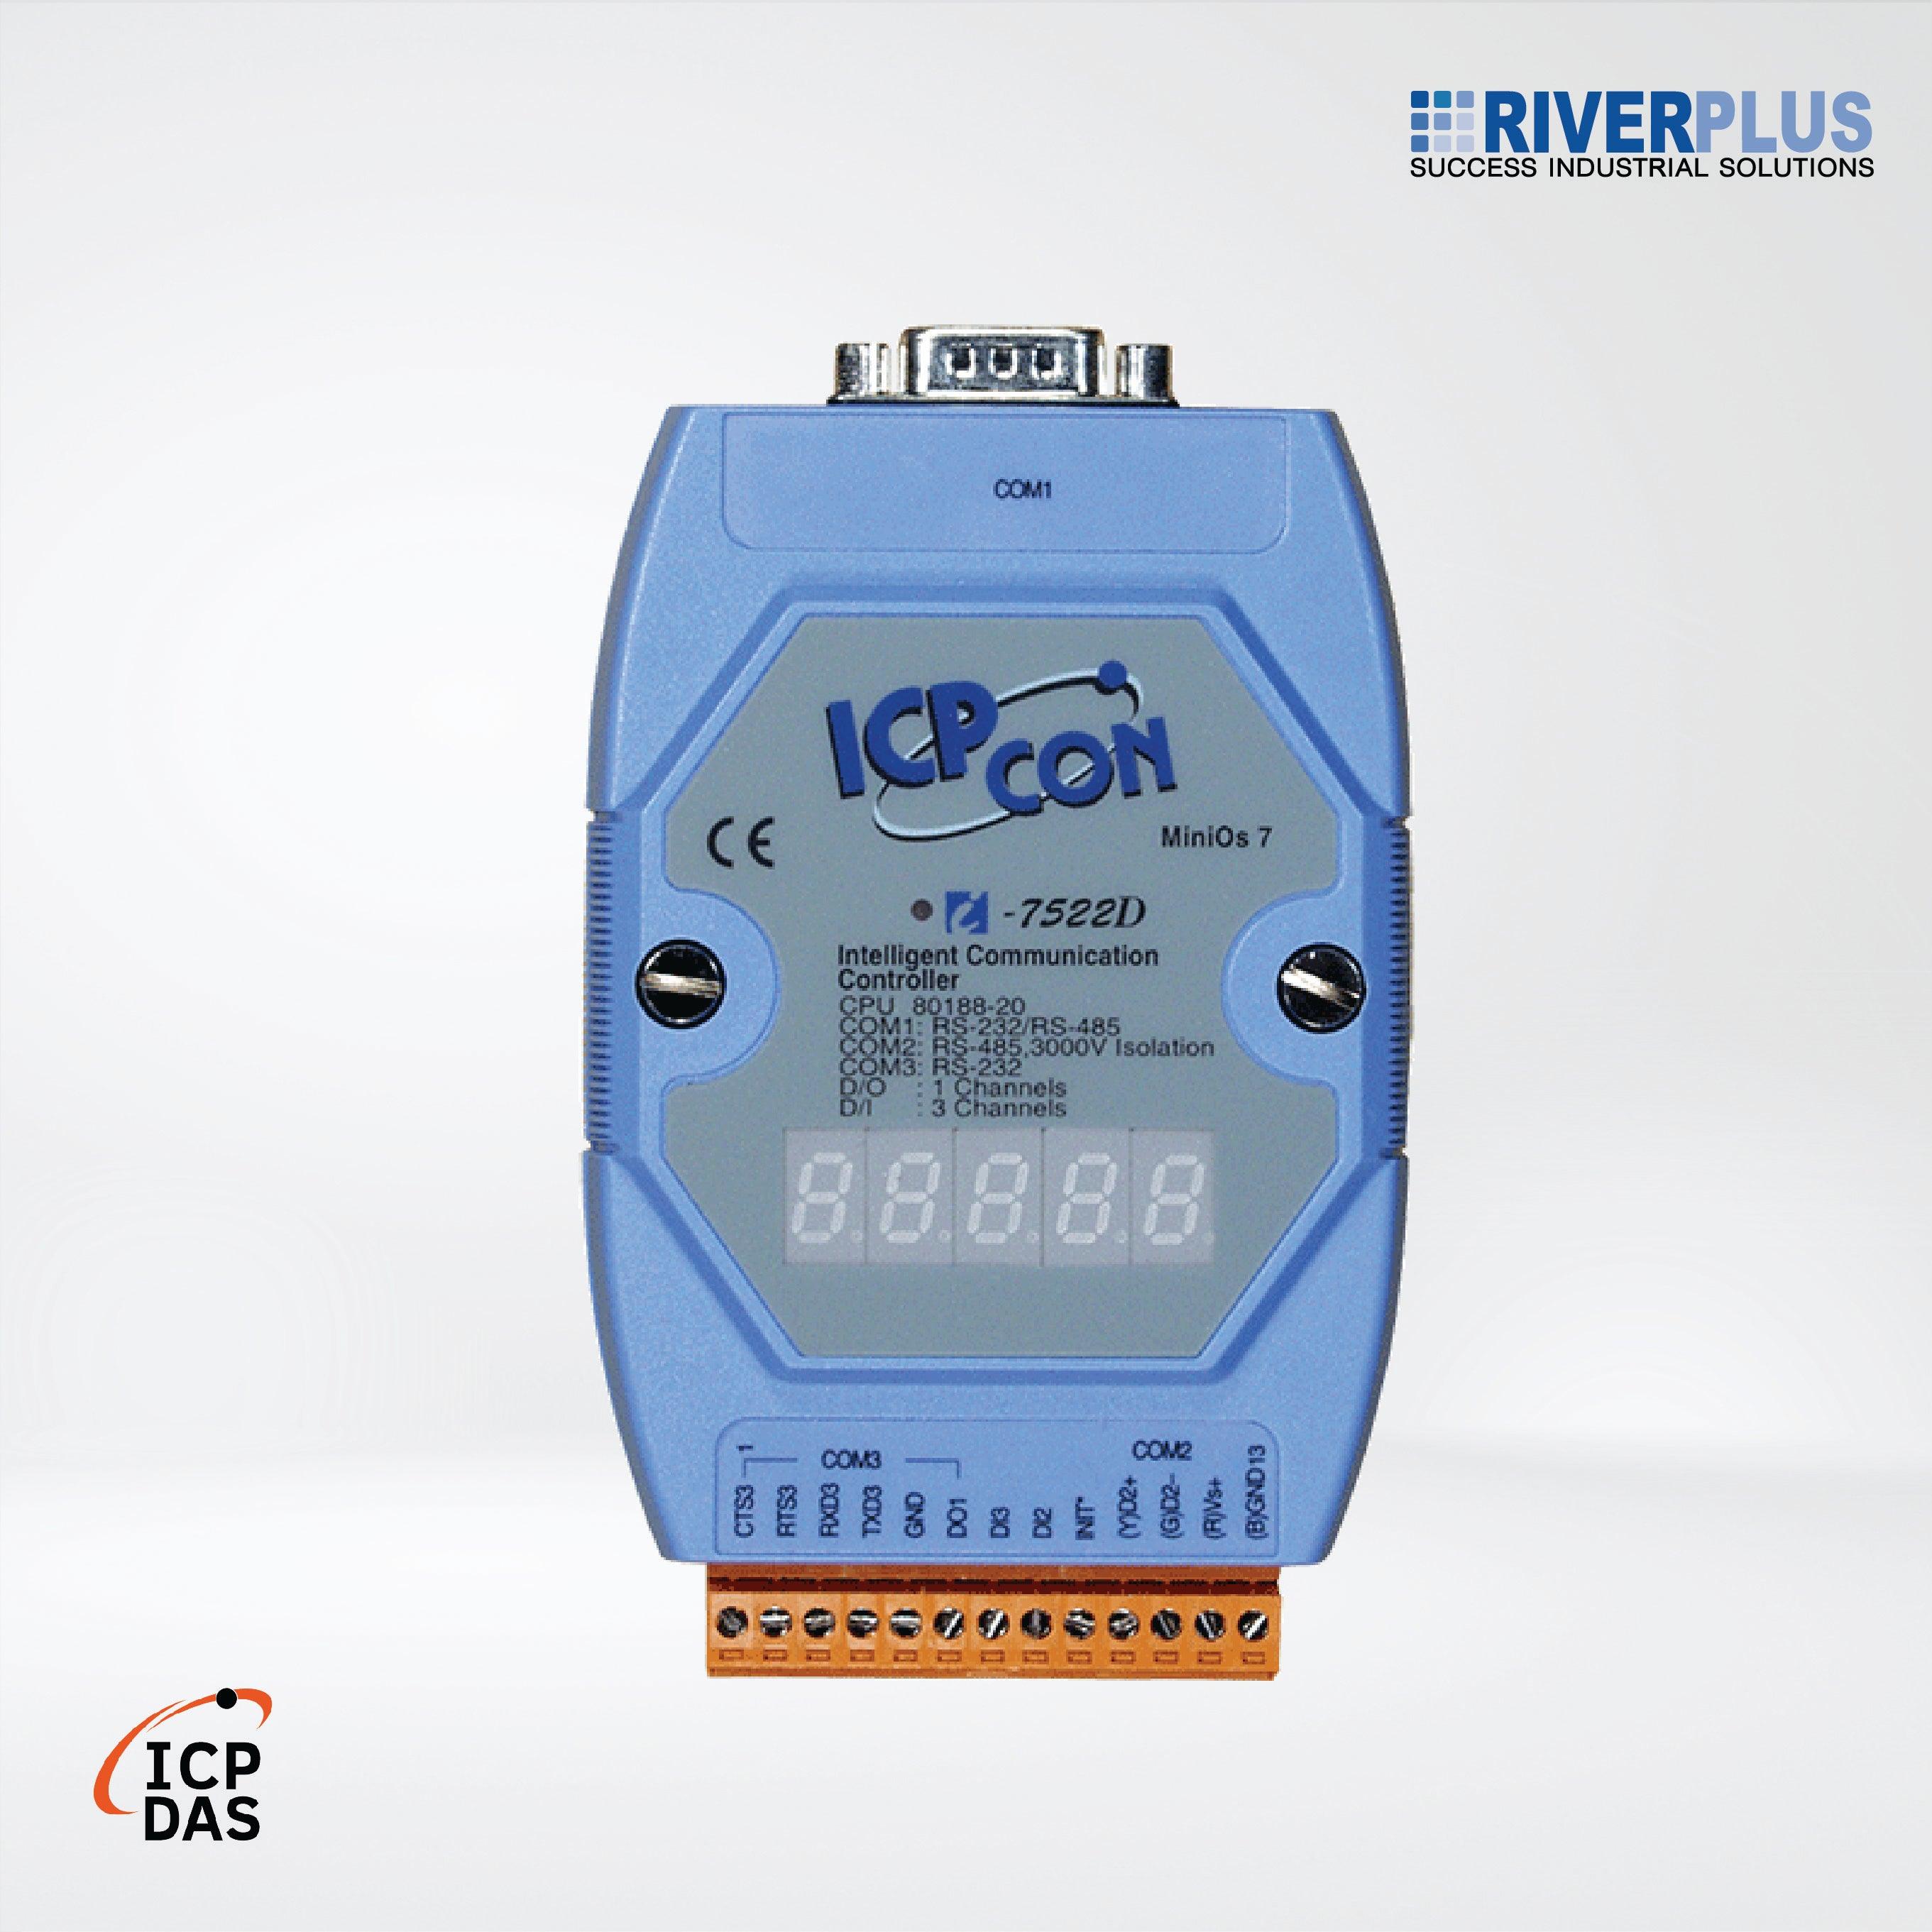 I-7522D Addressable RS-485 to 2 x RS-232/RS-485 Converter with 2 DI, 1 DO and 7-Segment LED Display (Blue Cover) - Riverplus